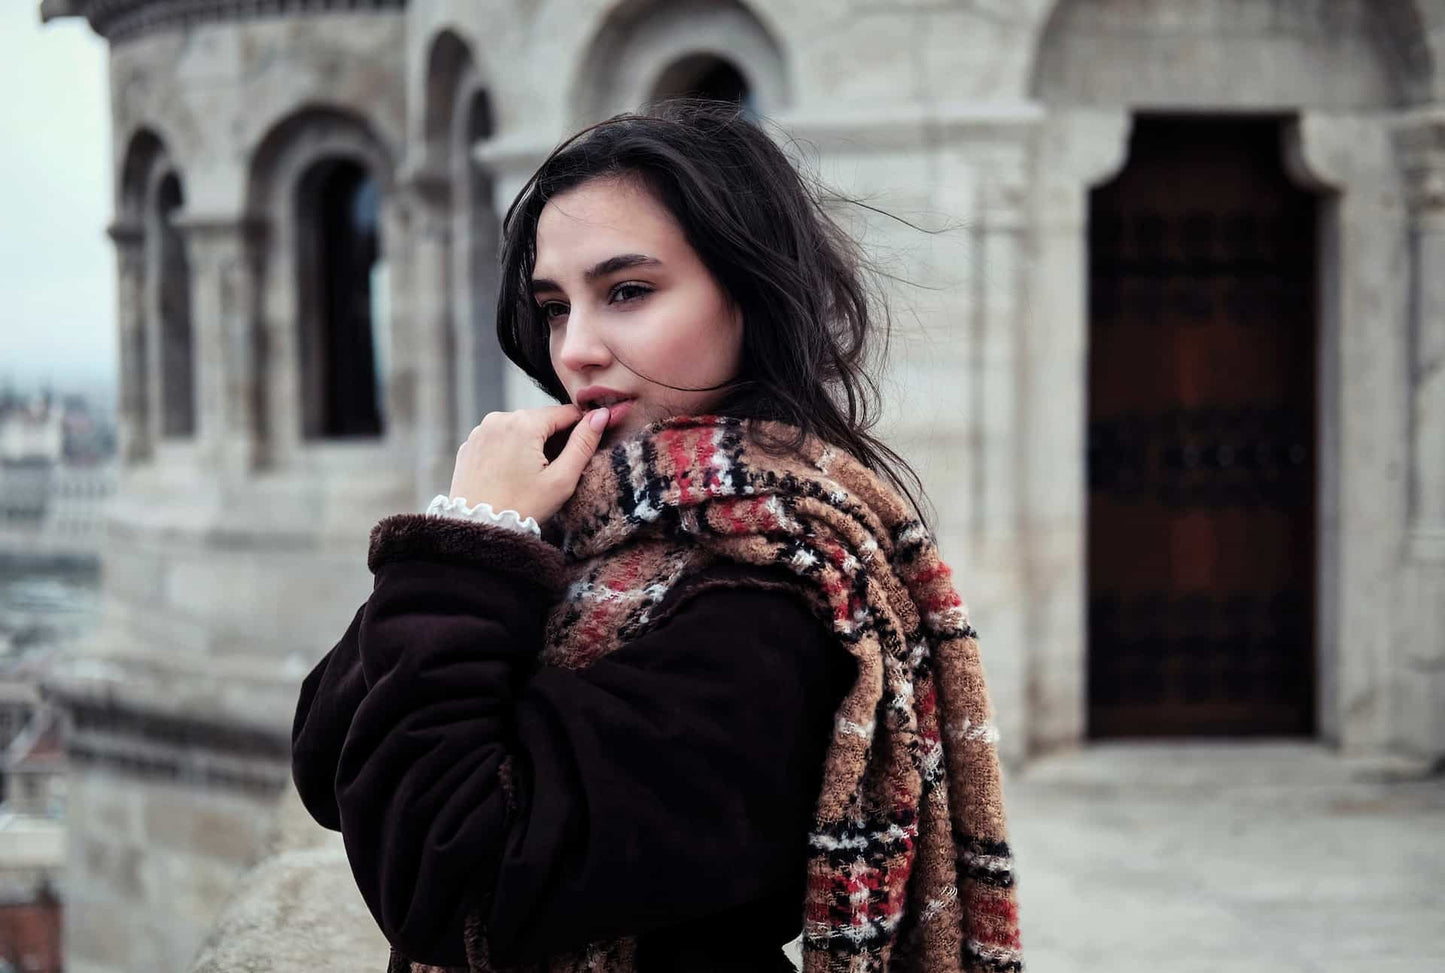 A woman wearing a coat and a scarf